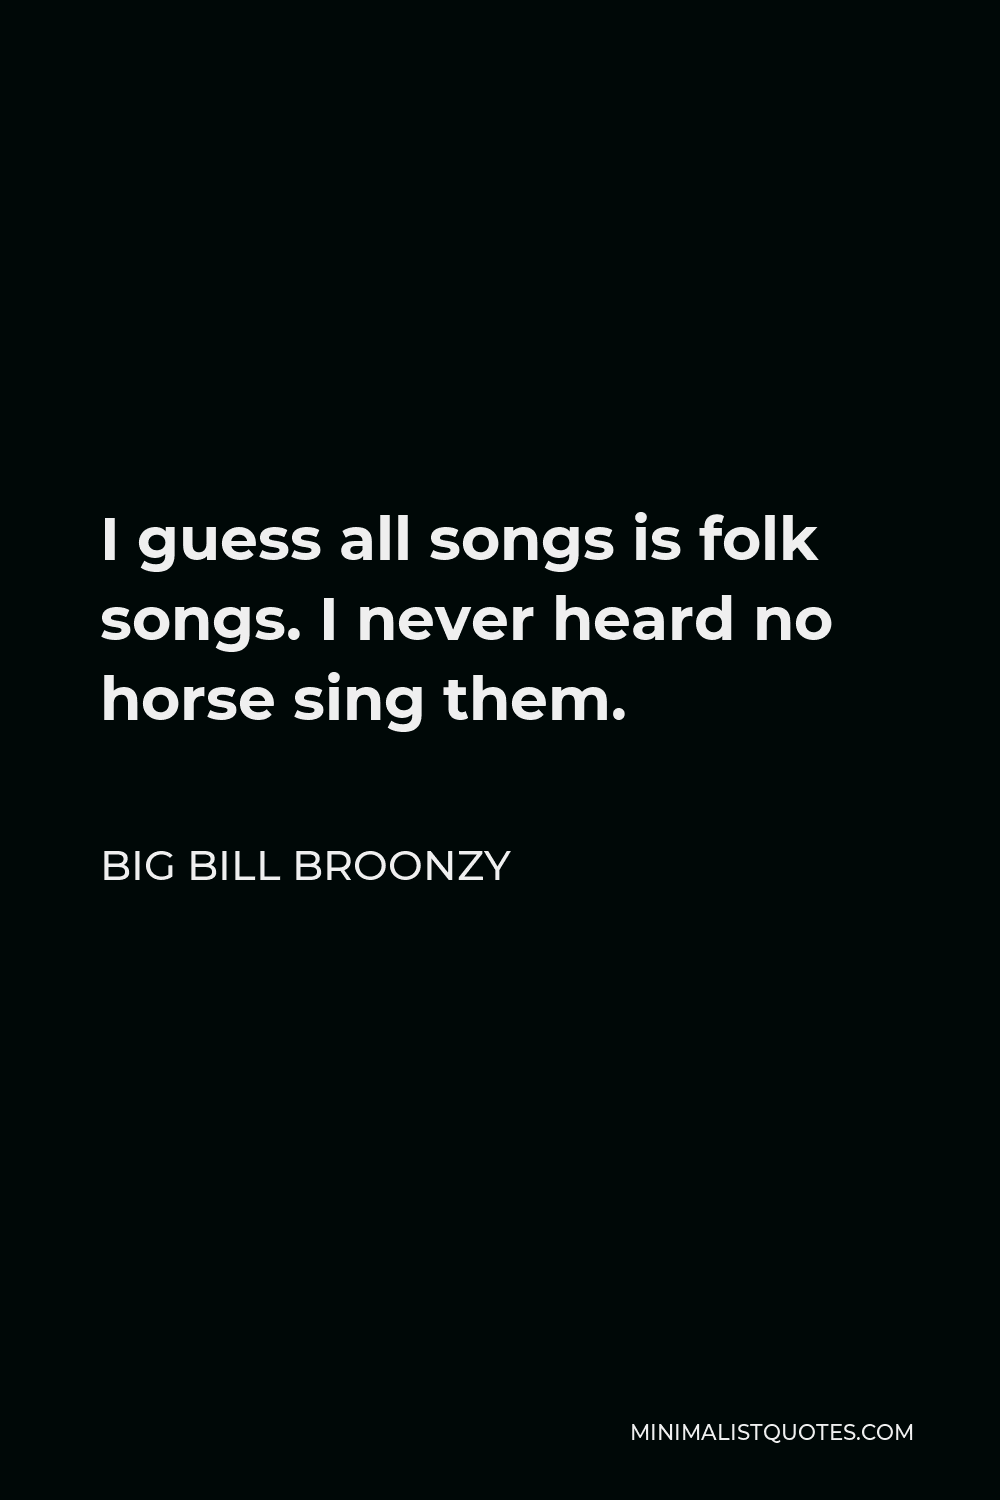 Big Bill Broonzy Quote - I guess all songs is folk songs. I never heard no horse sing them.